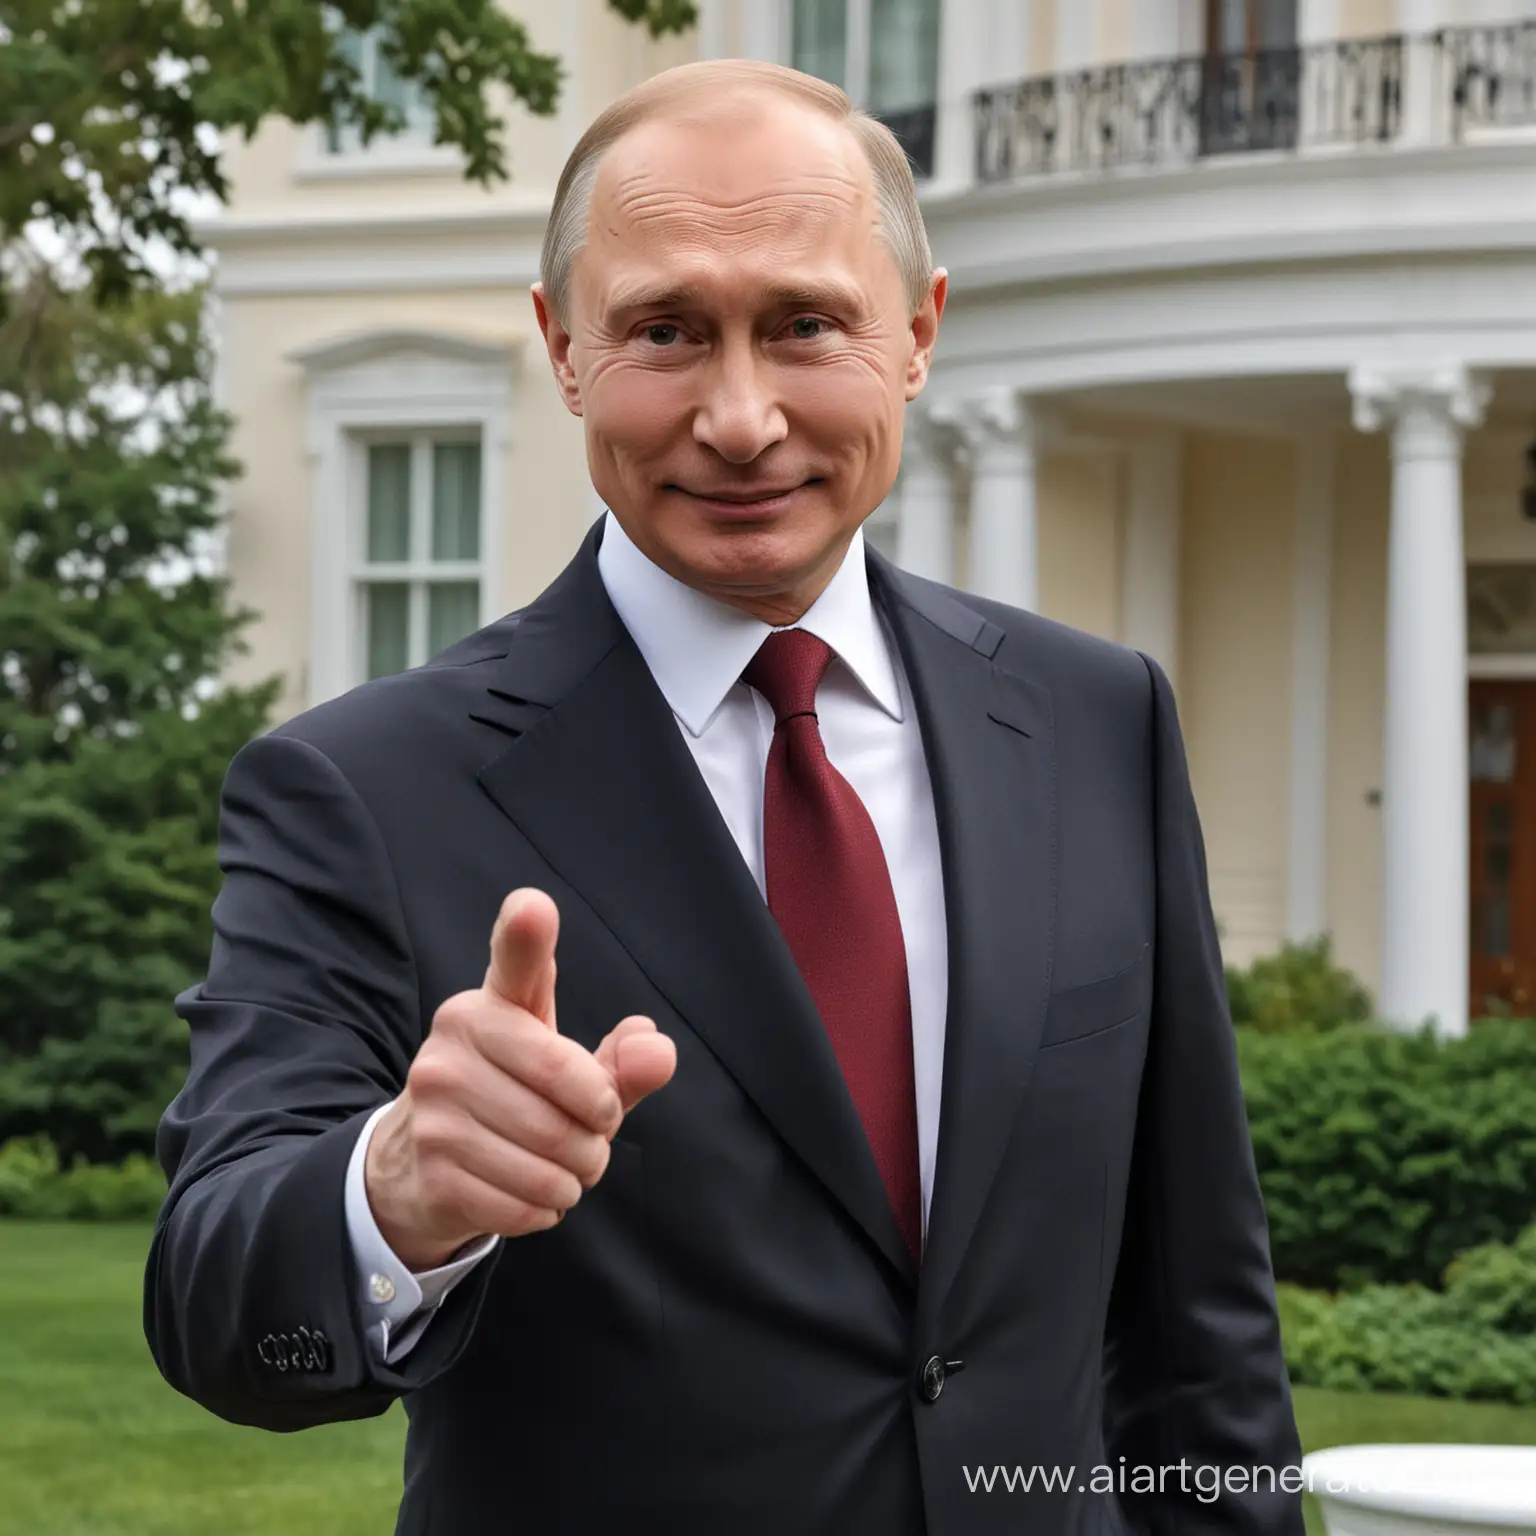 Putin-Maliciously-Smiles-Pressing-Red-Button-Launching-Missile-towards-White-House